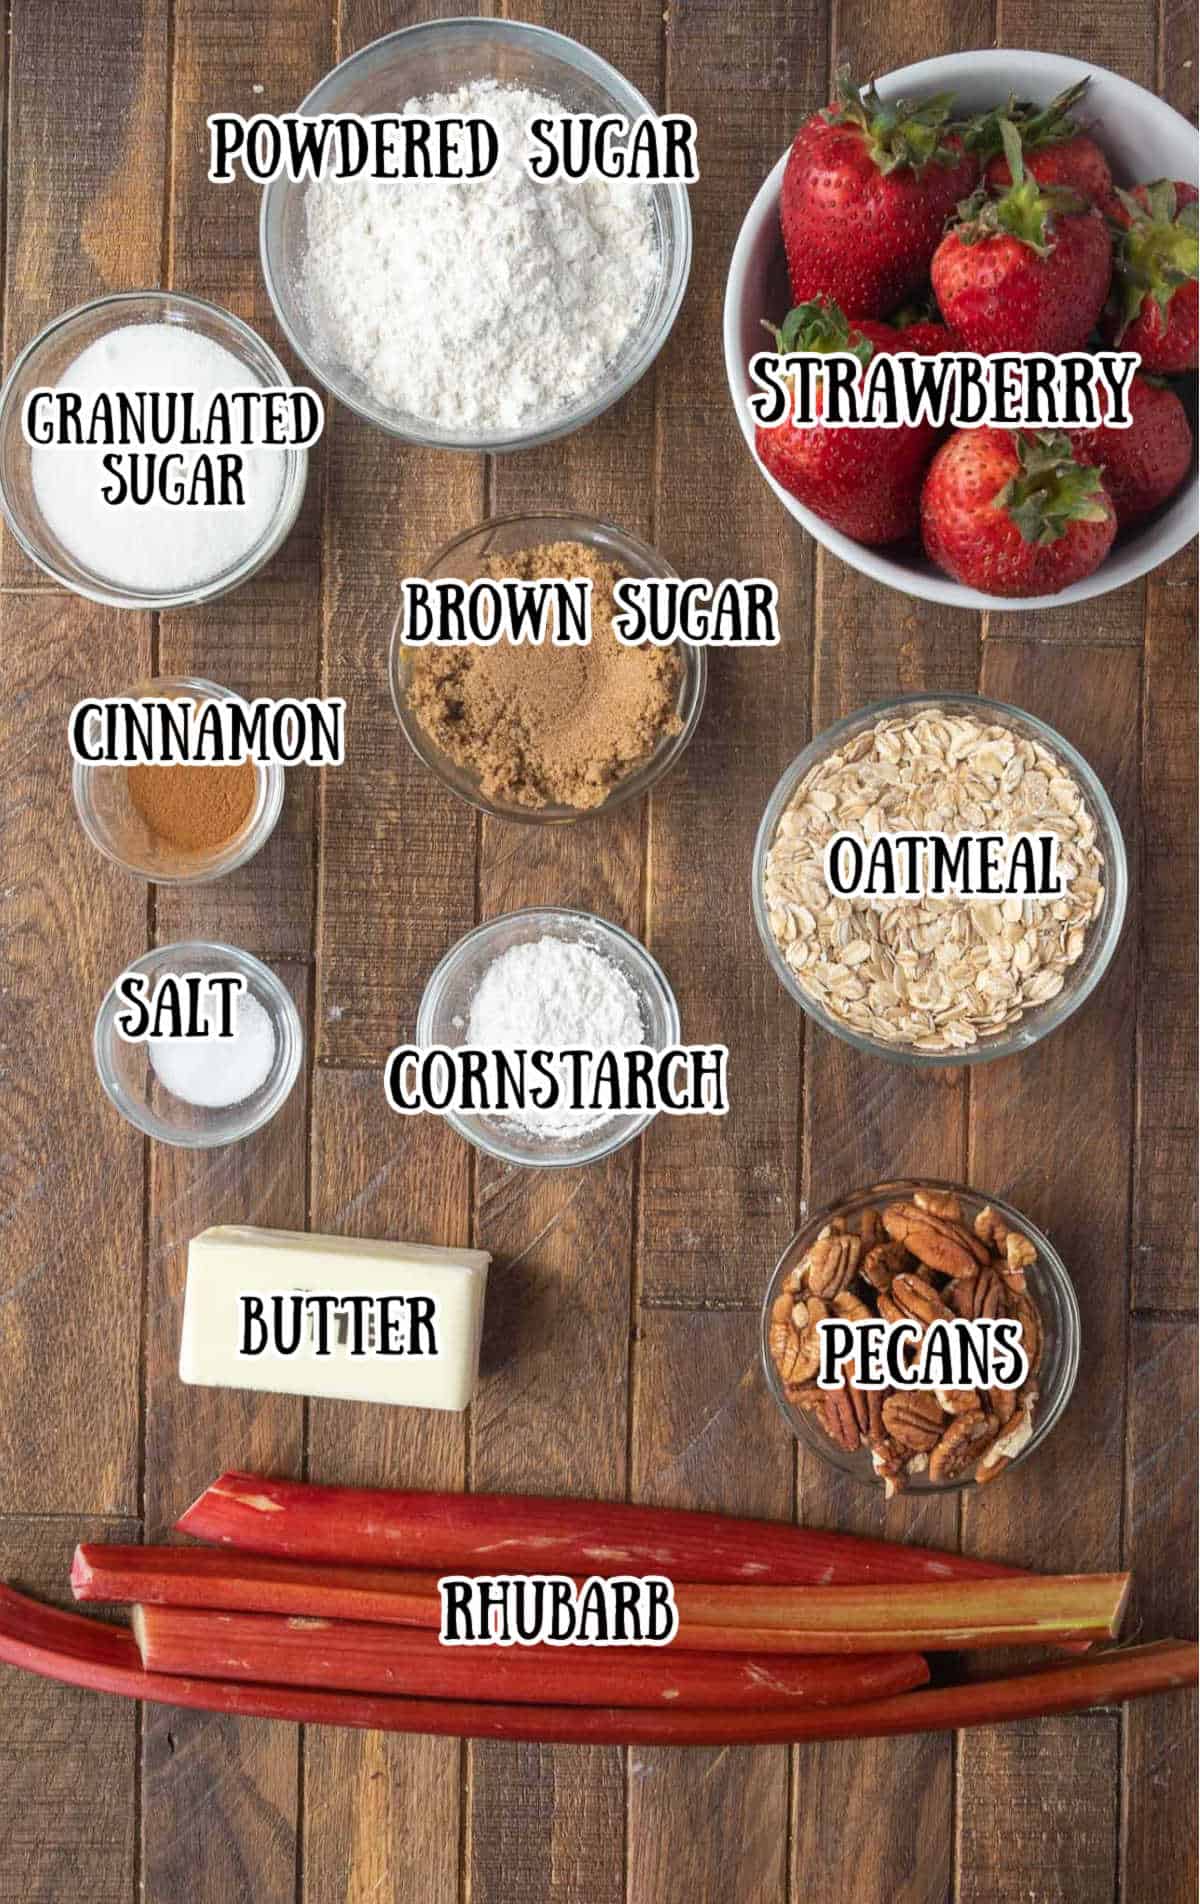 All the ingredients needed for this strawberry crisp.